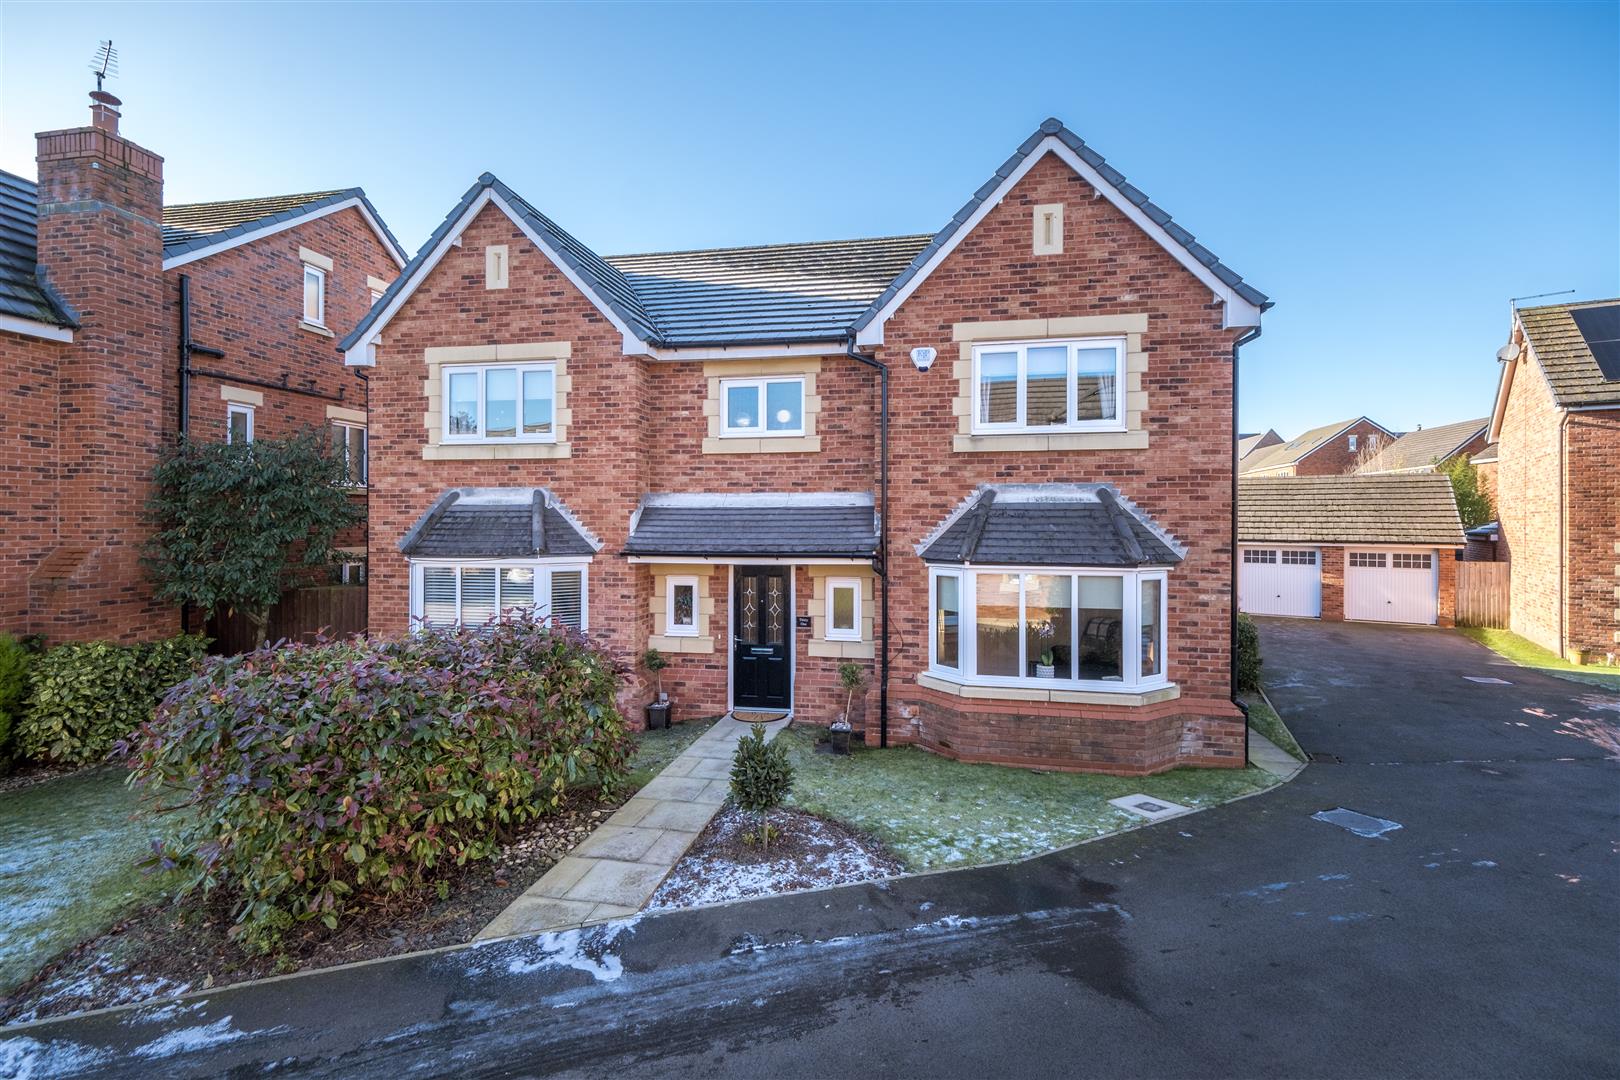 5 bedroom  Detached House for Sale in Northwich